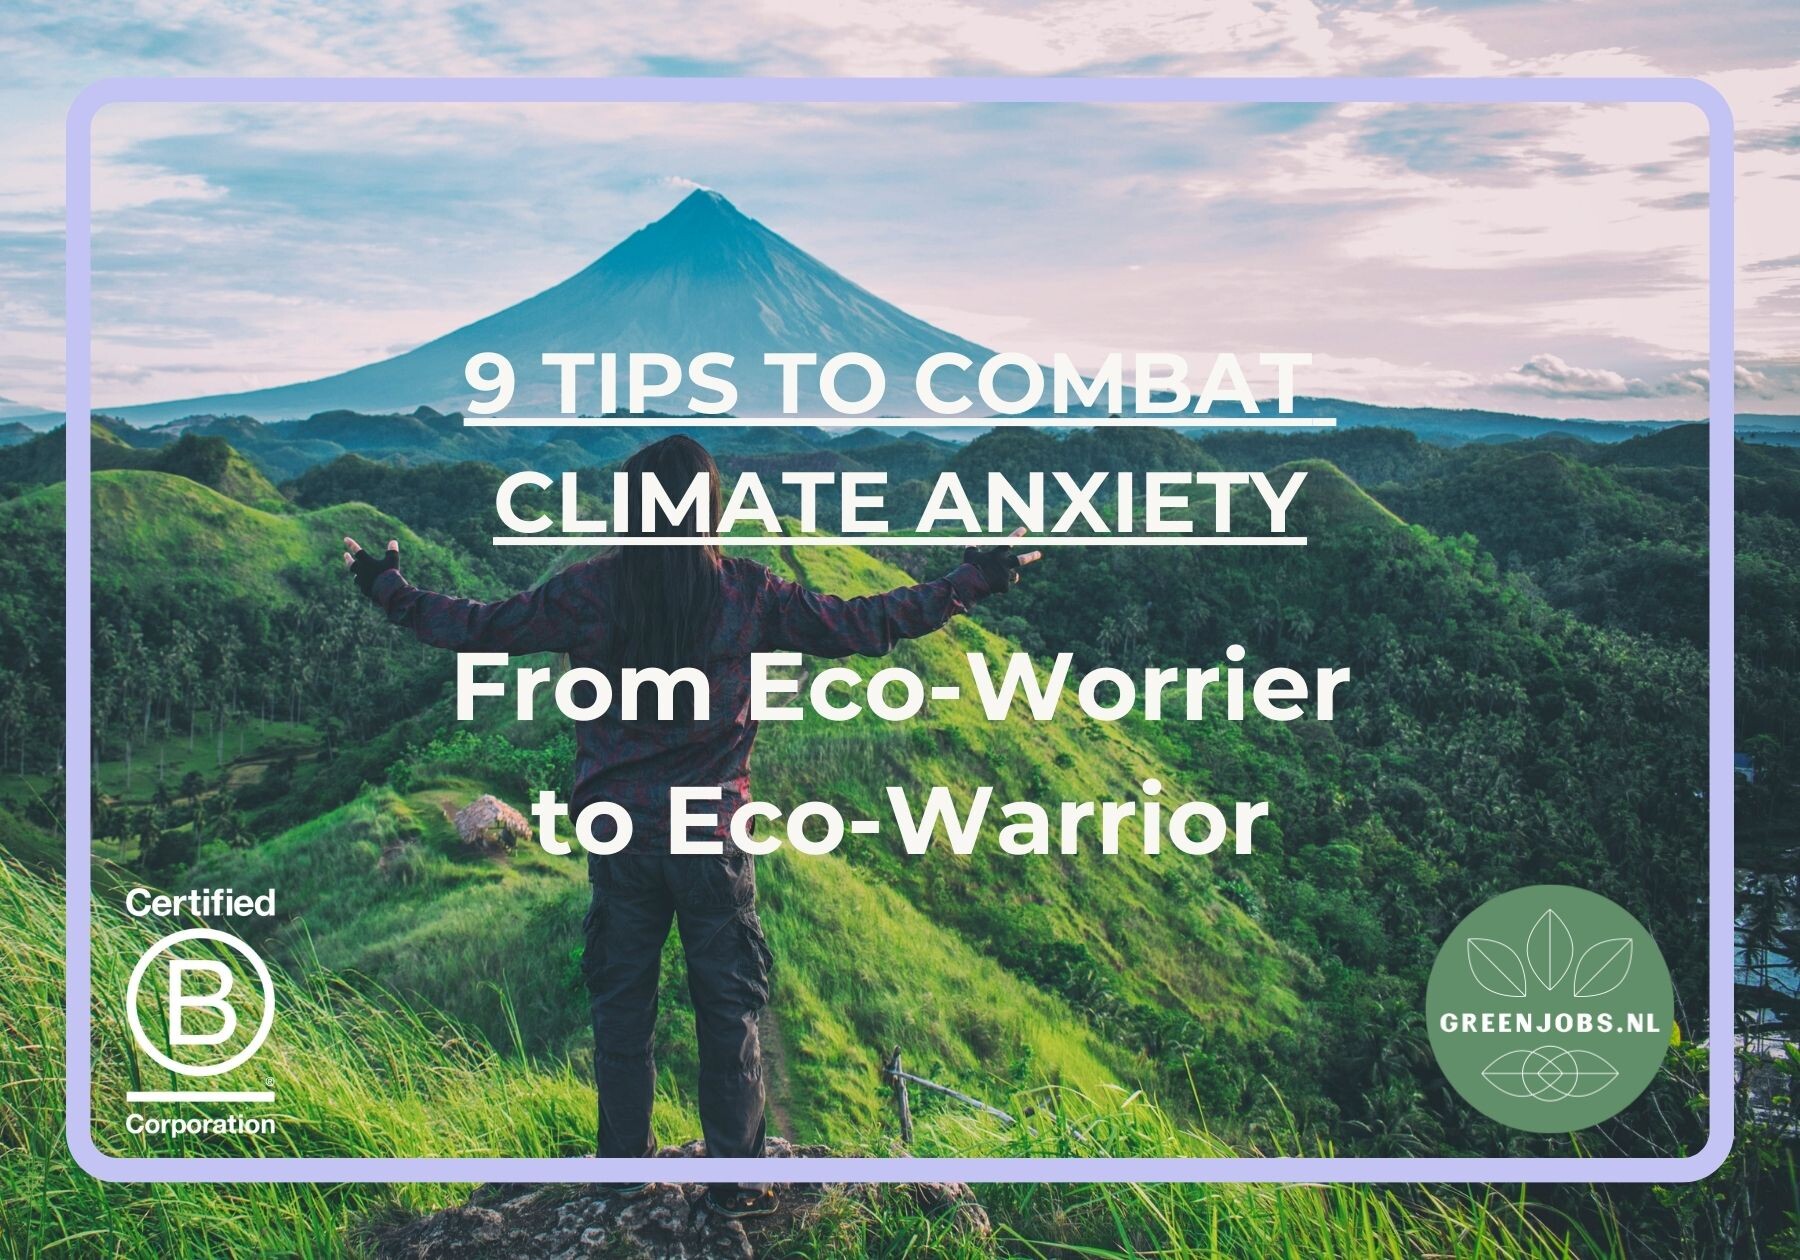 From Eco-Worrier to Eco-Warrior: 9 Tips to Combat Climate Anxiety